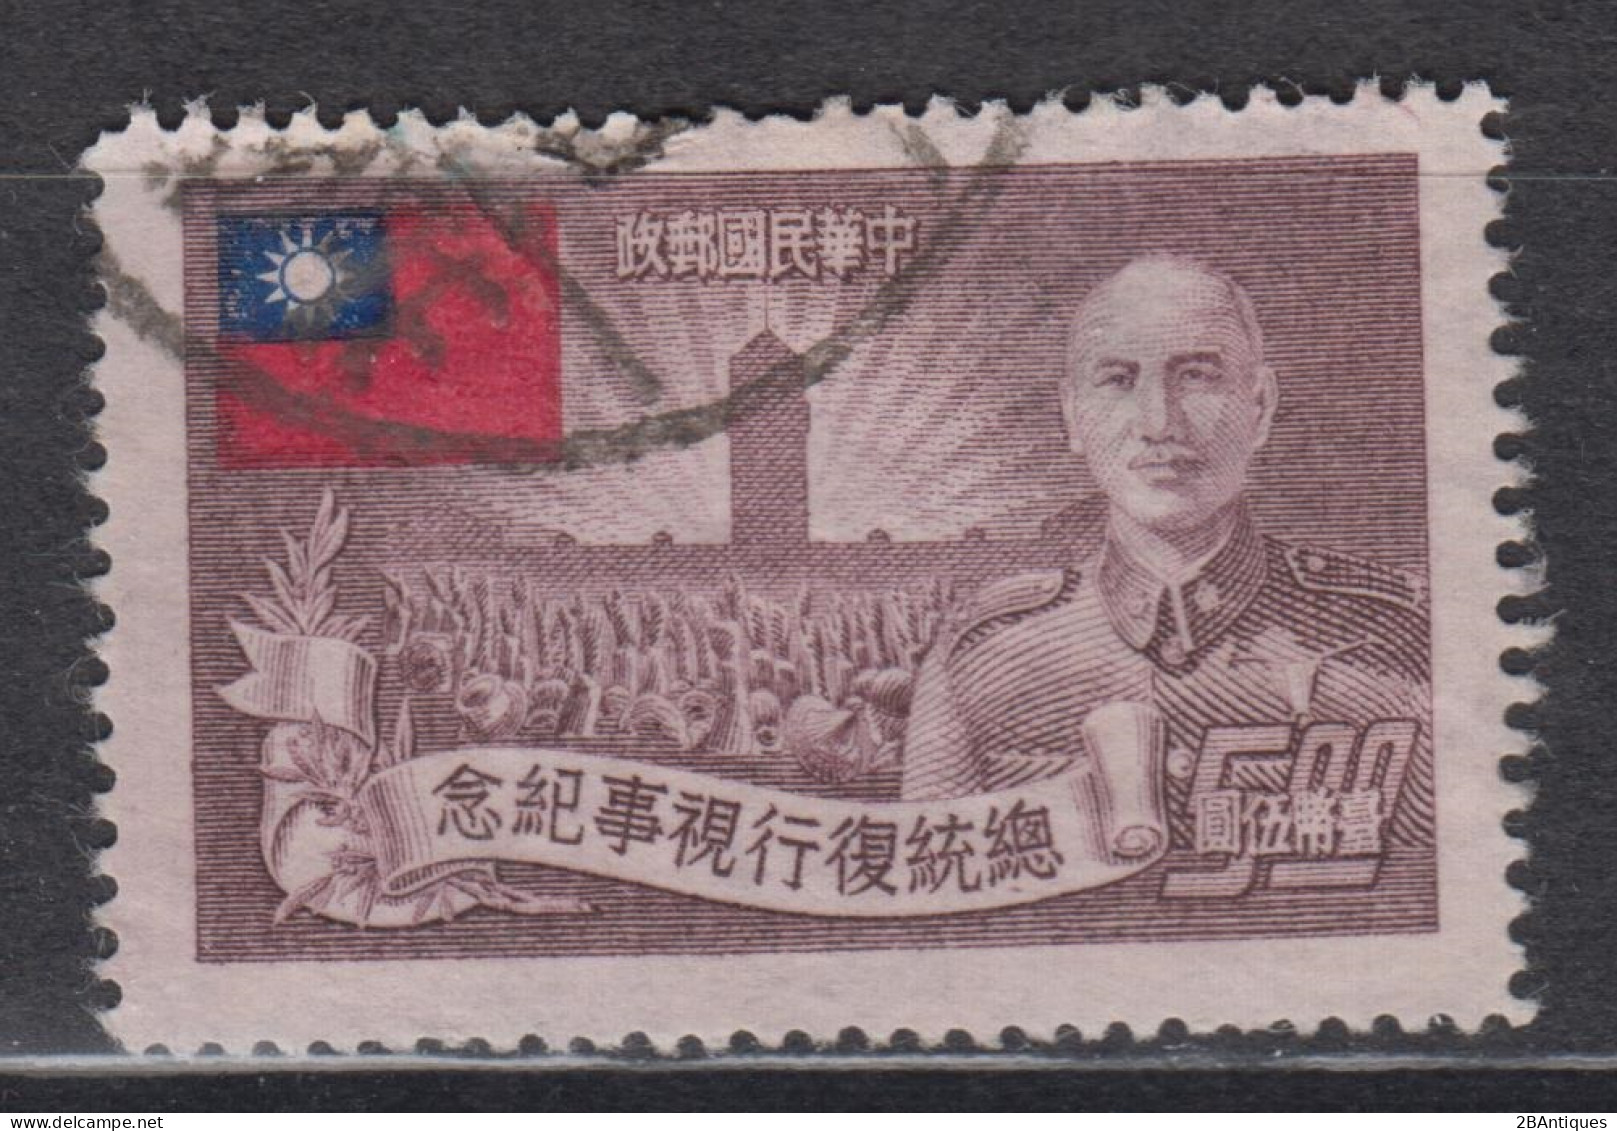 TAIWAN 1953 - The 3rd Anniversary Of Re-election Of President Chiang Kai-shek KEY VALUE! - Used Stamps